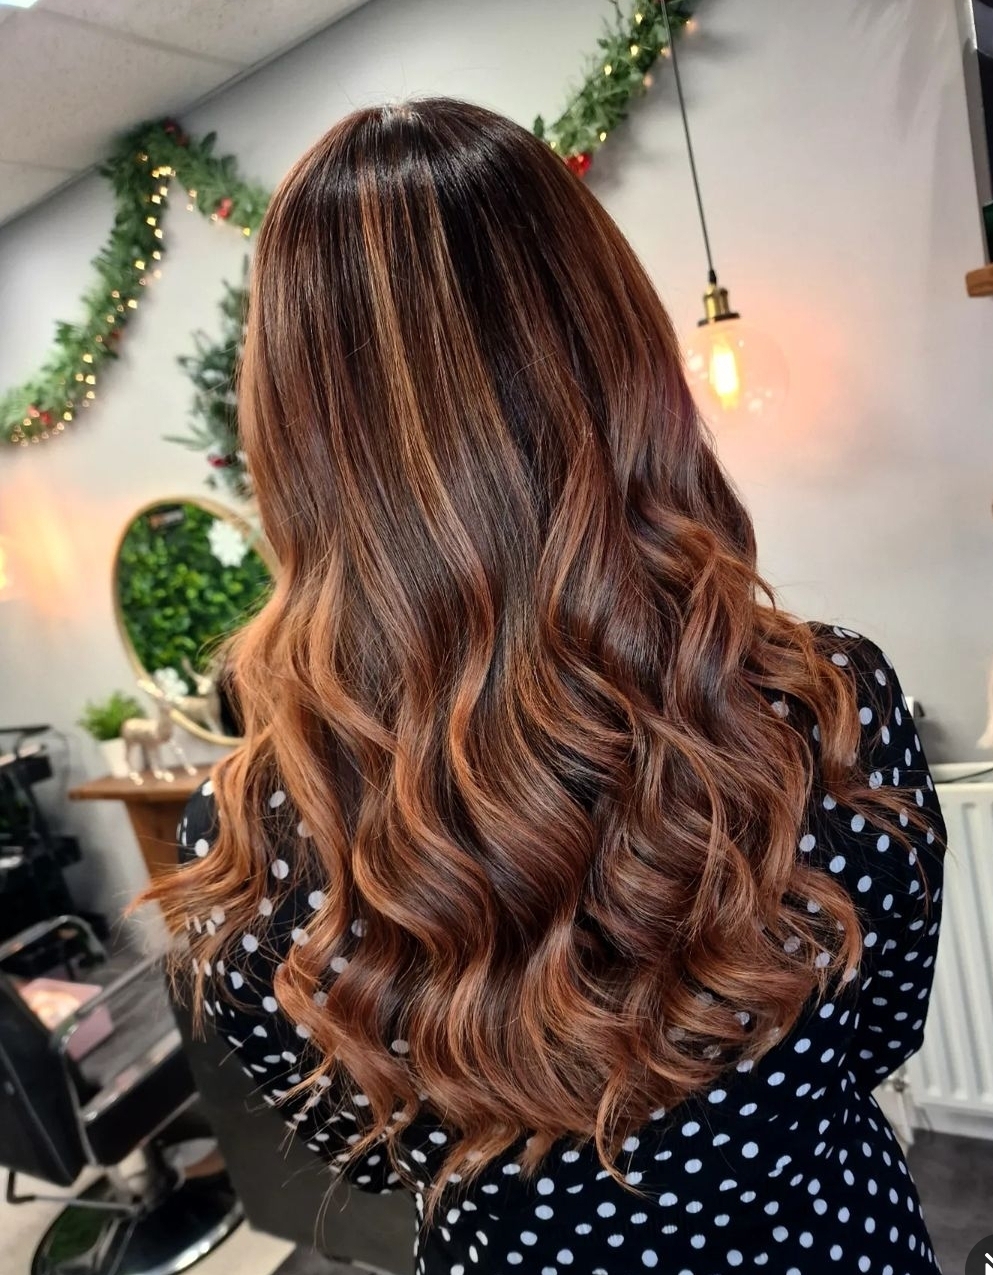 Glossy, bouncy waves